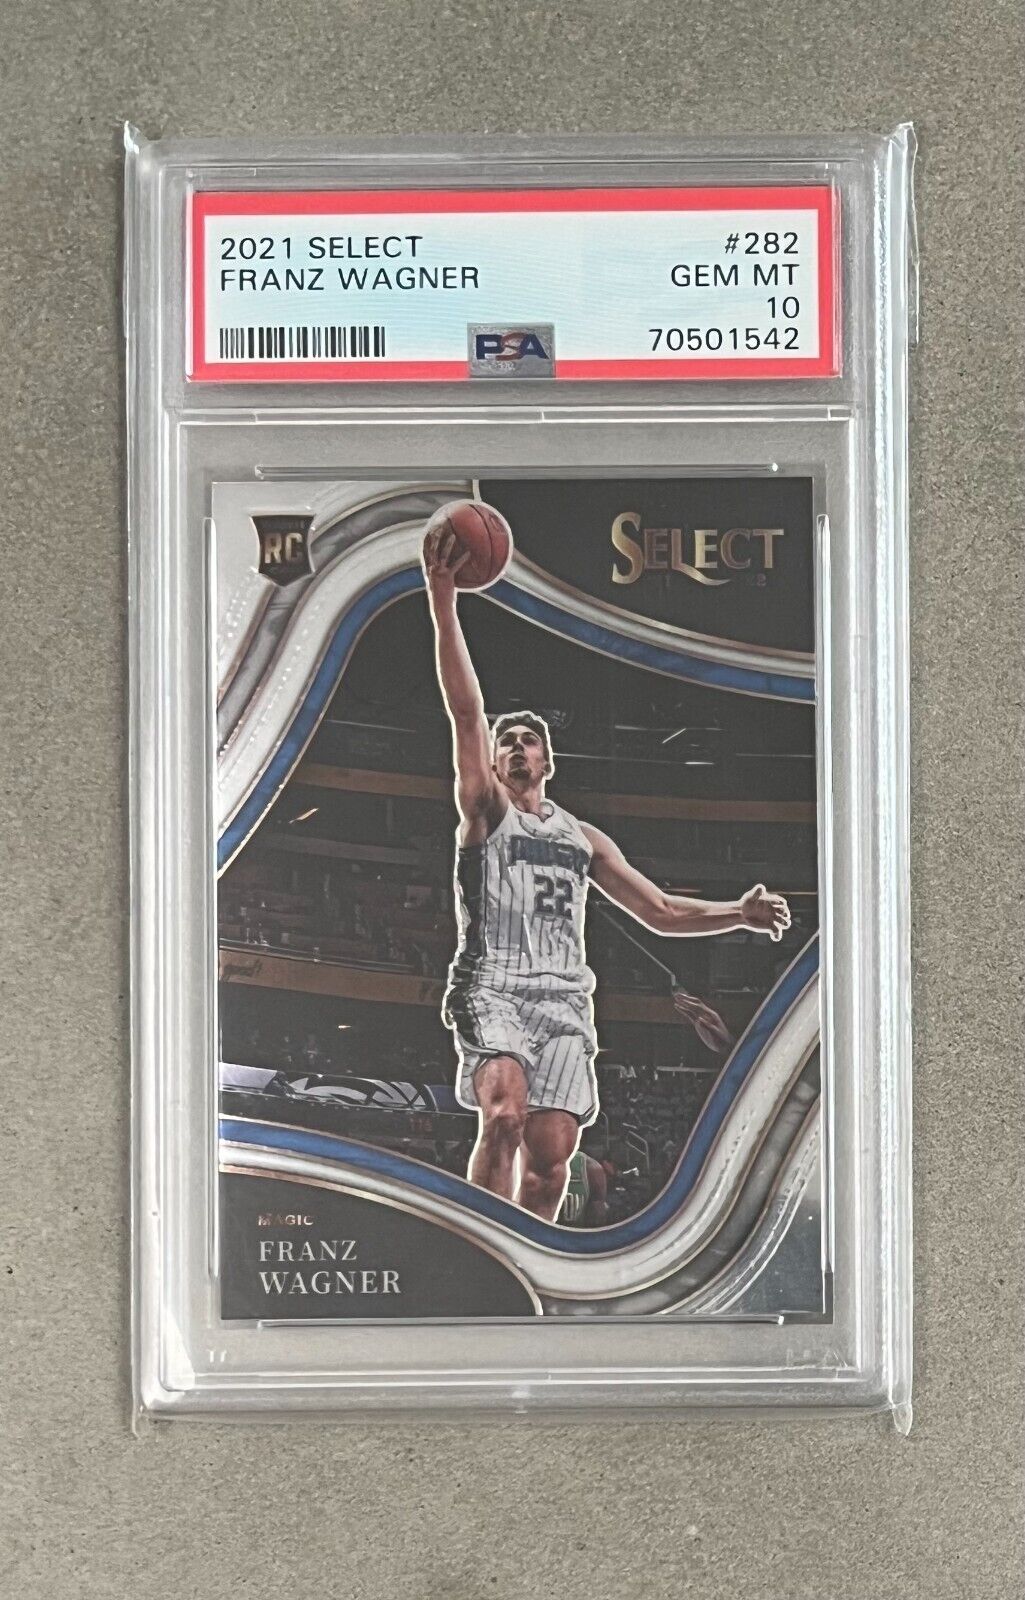 2021 Panini Select Franz Wagner Concourse Rookie Card PSA 10 Card #282